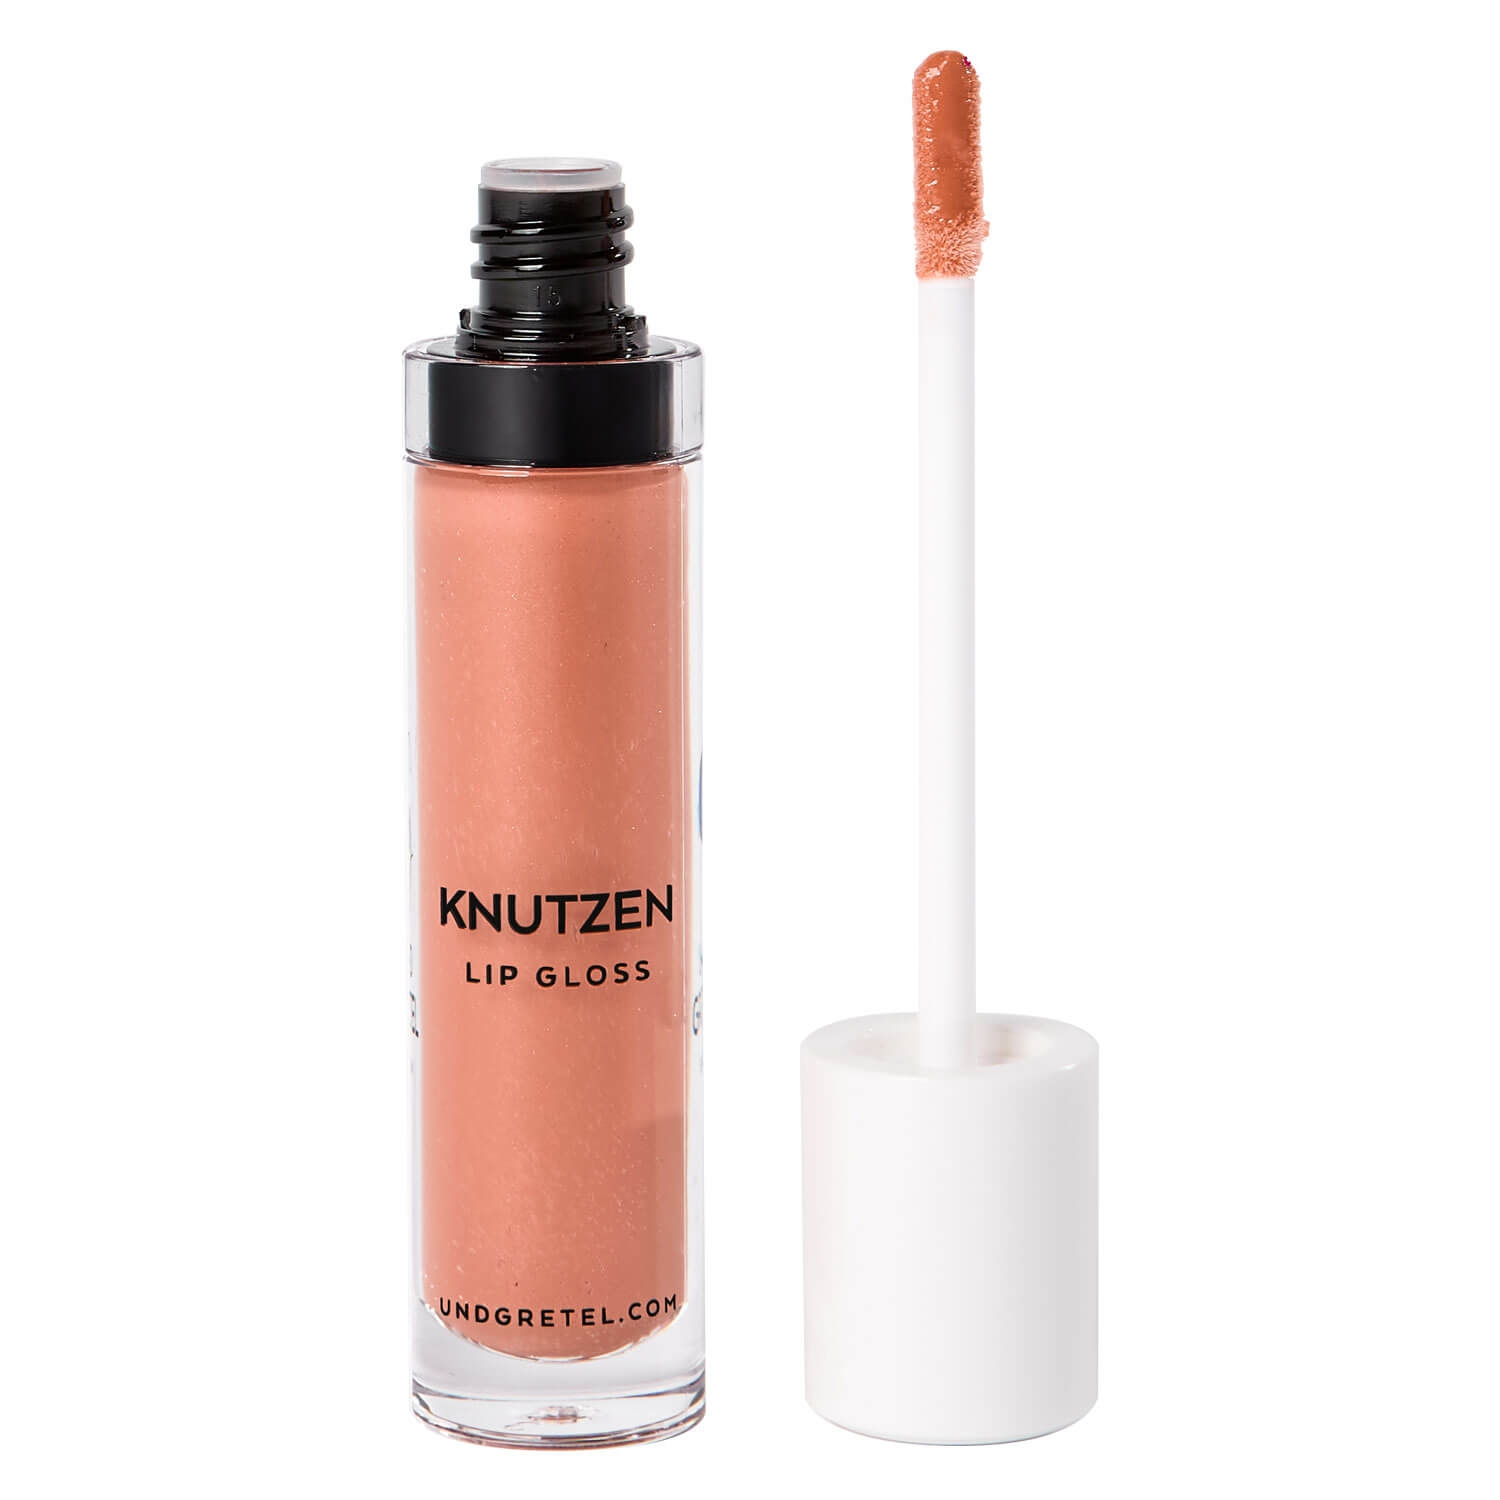 Product image from UND GRETEL Lips - KNUTZEN Lipgloss Nude Shimmer 7